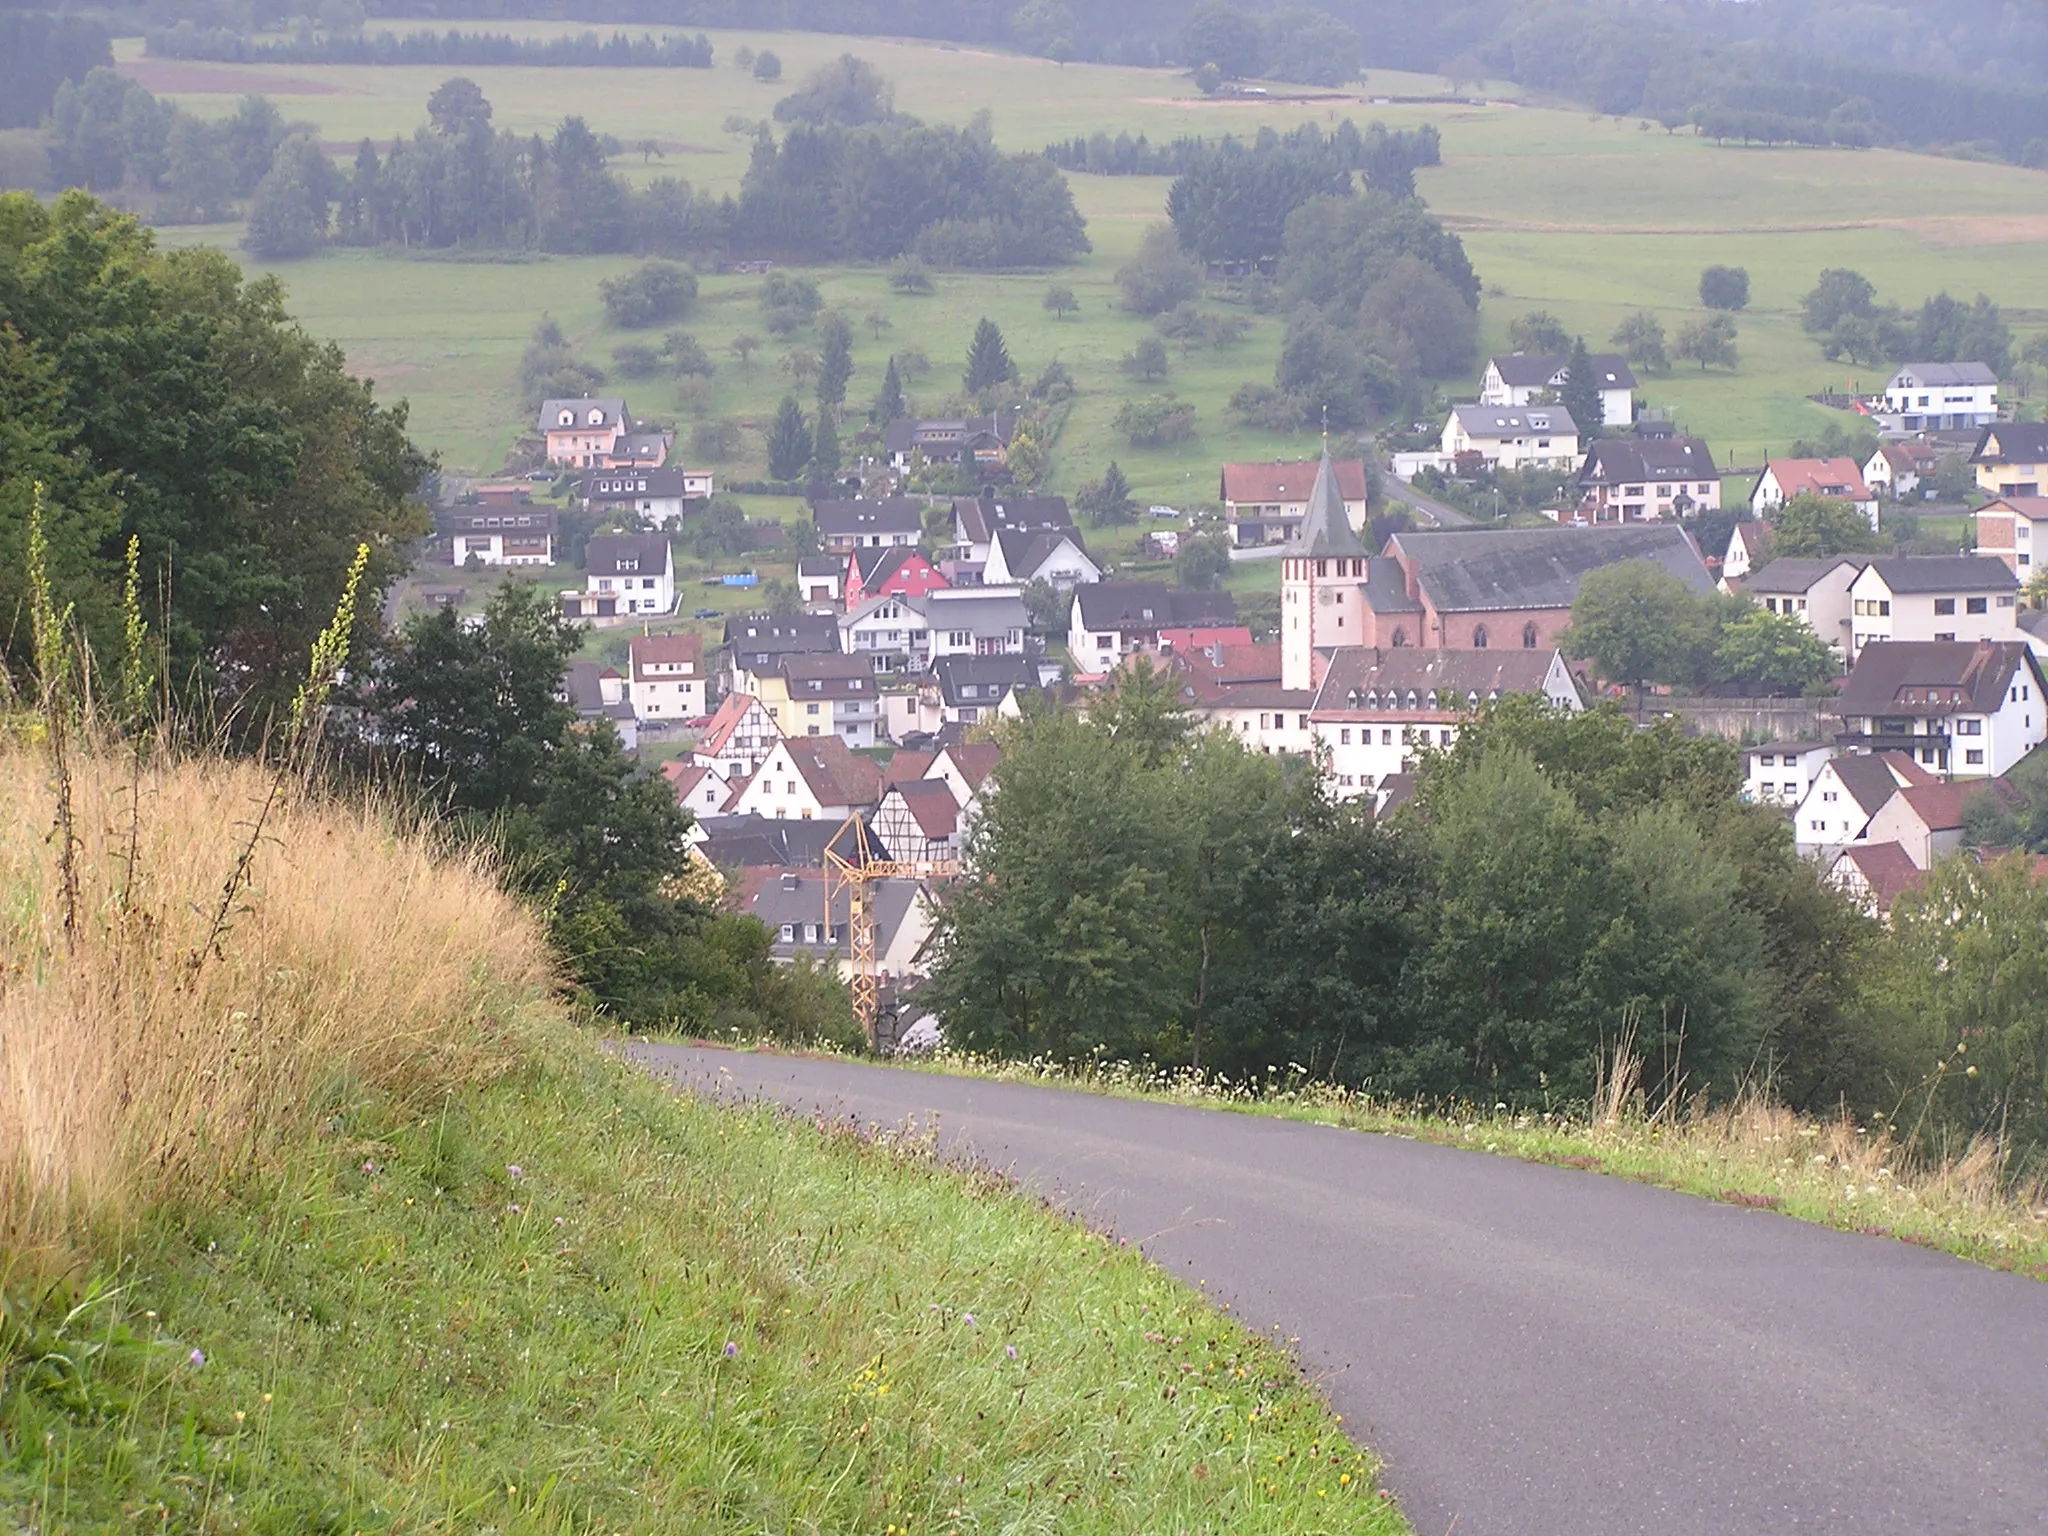 Image of Frammersbach